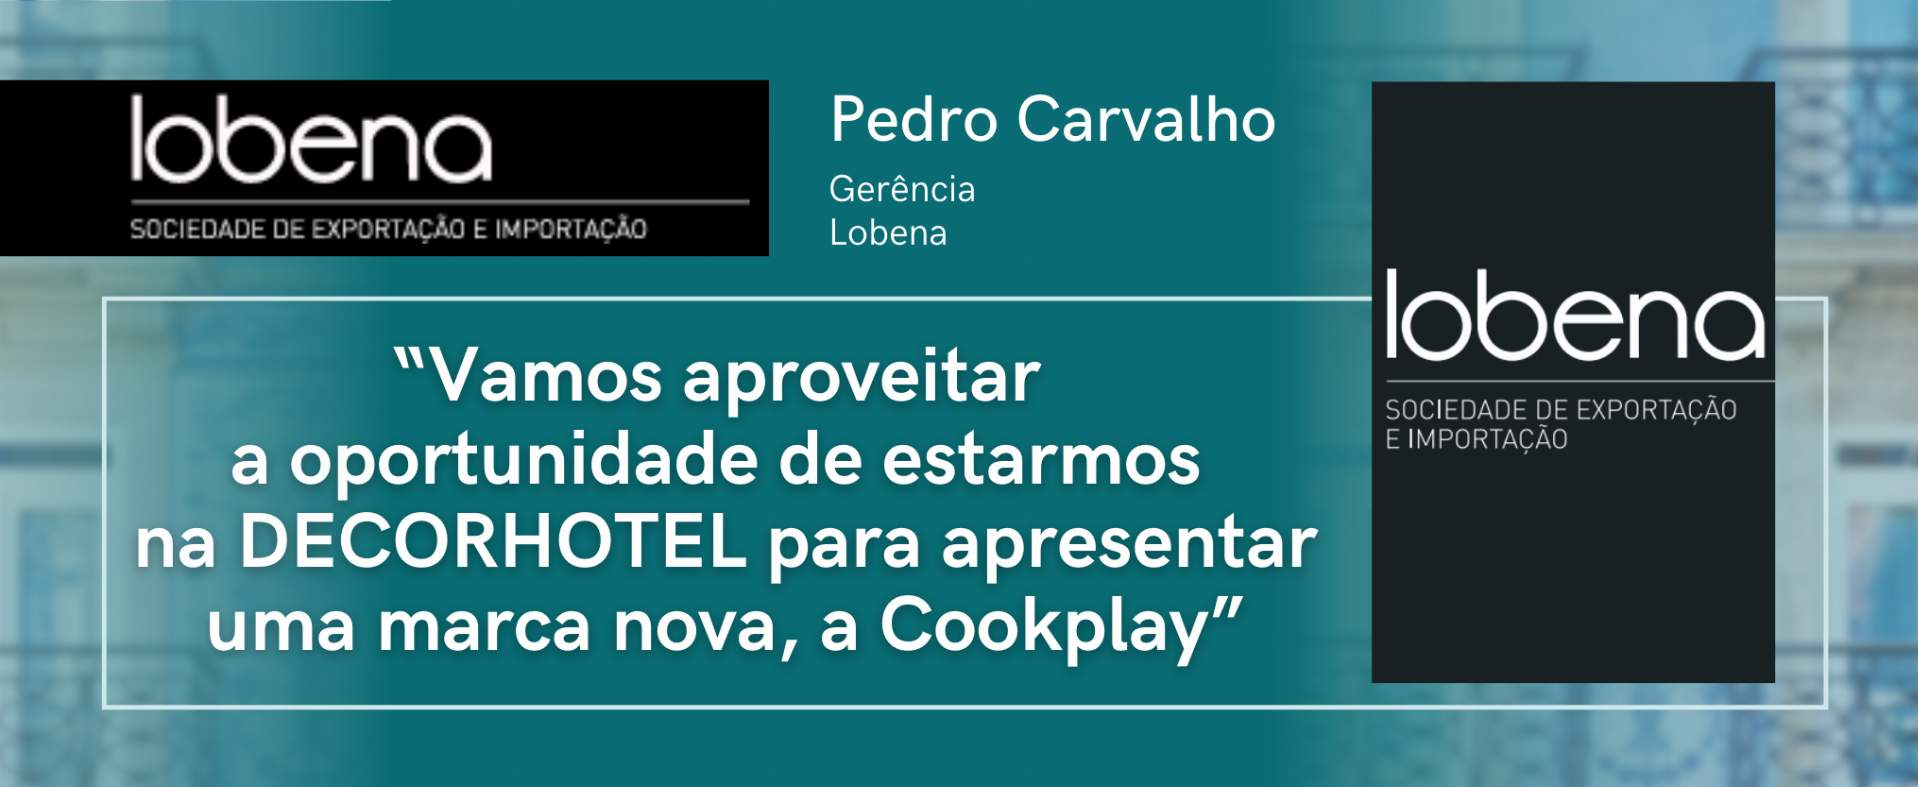 Lobena: "We will take the opportunity of being present at DECORHOTEL to present a new brand, Cookplay".